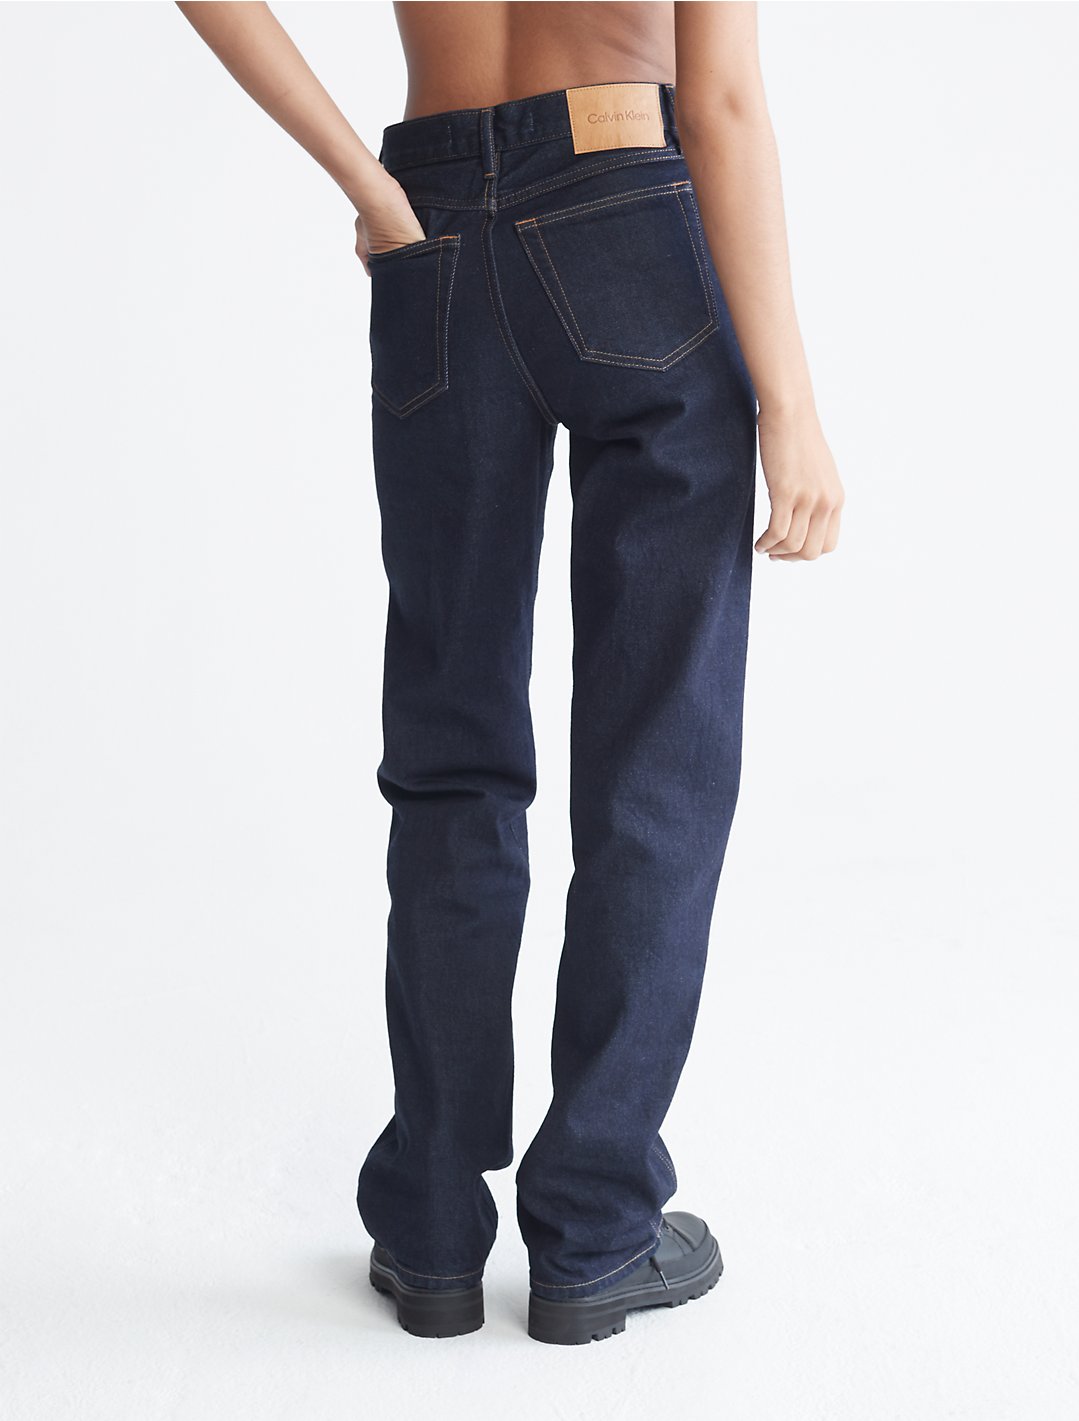 Standards Iconic Straight Fit Vintage Selvedge Jeans | Calvin Klein